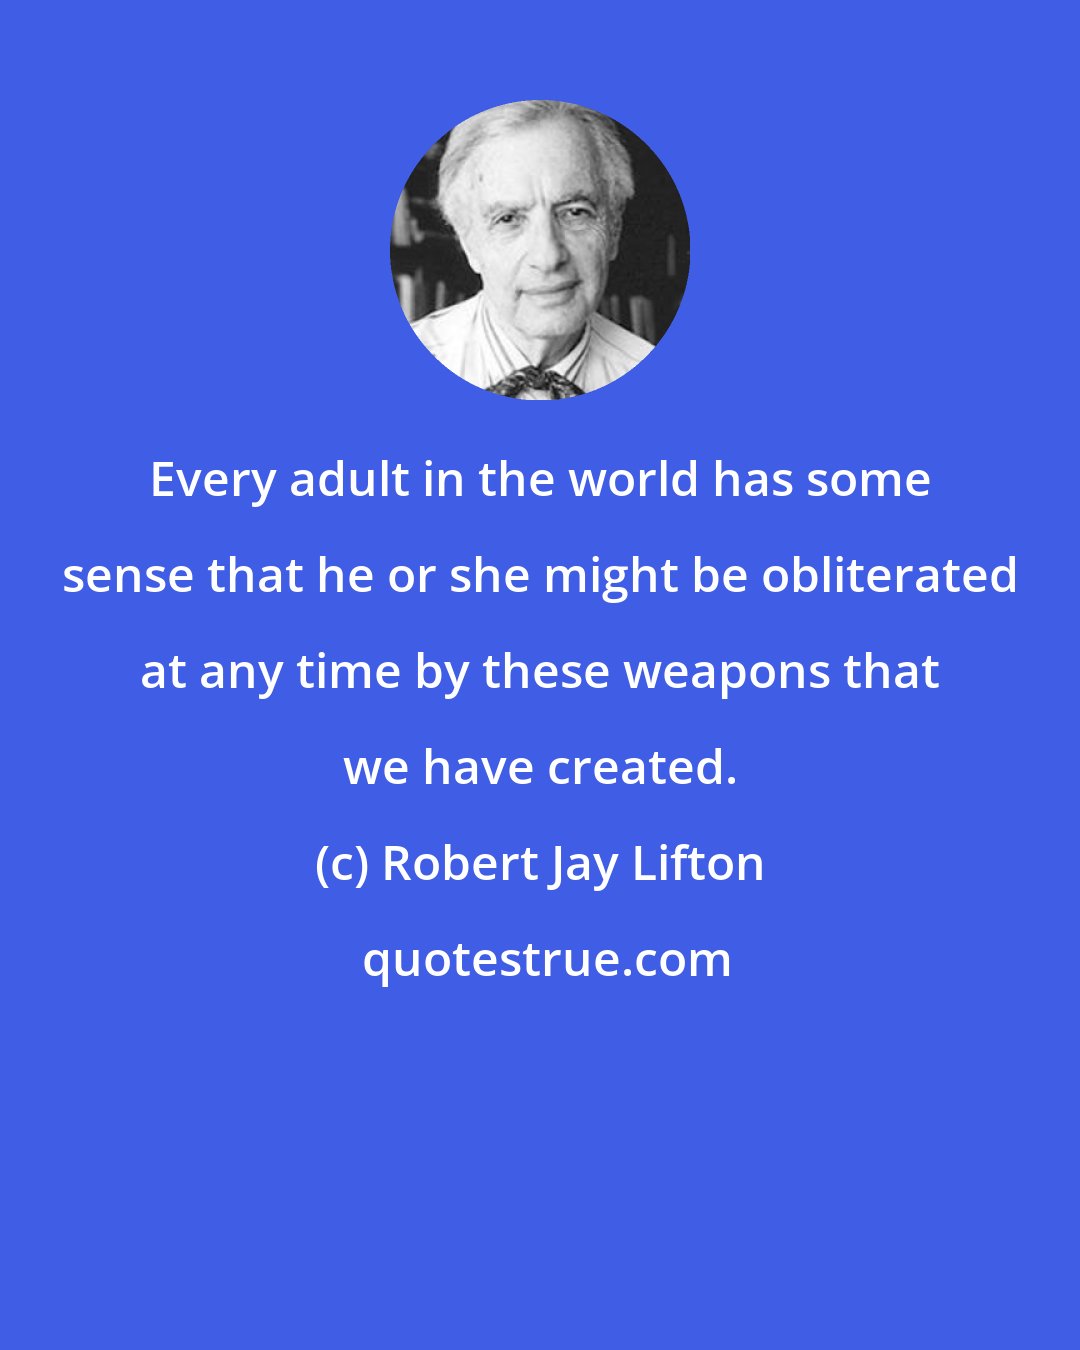 Robert Jay Lifton: Every adult in the world has some sense that he or she might be obliterated at any time by these weapons that we have created.